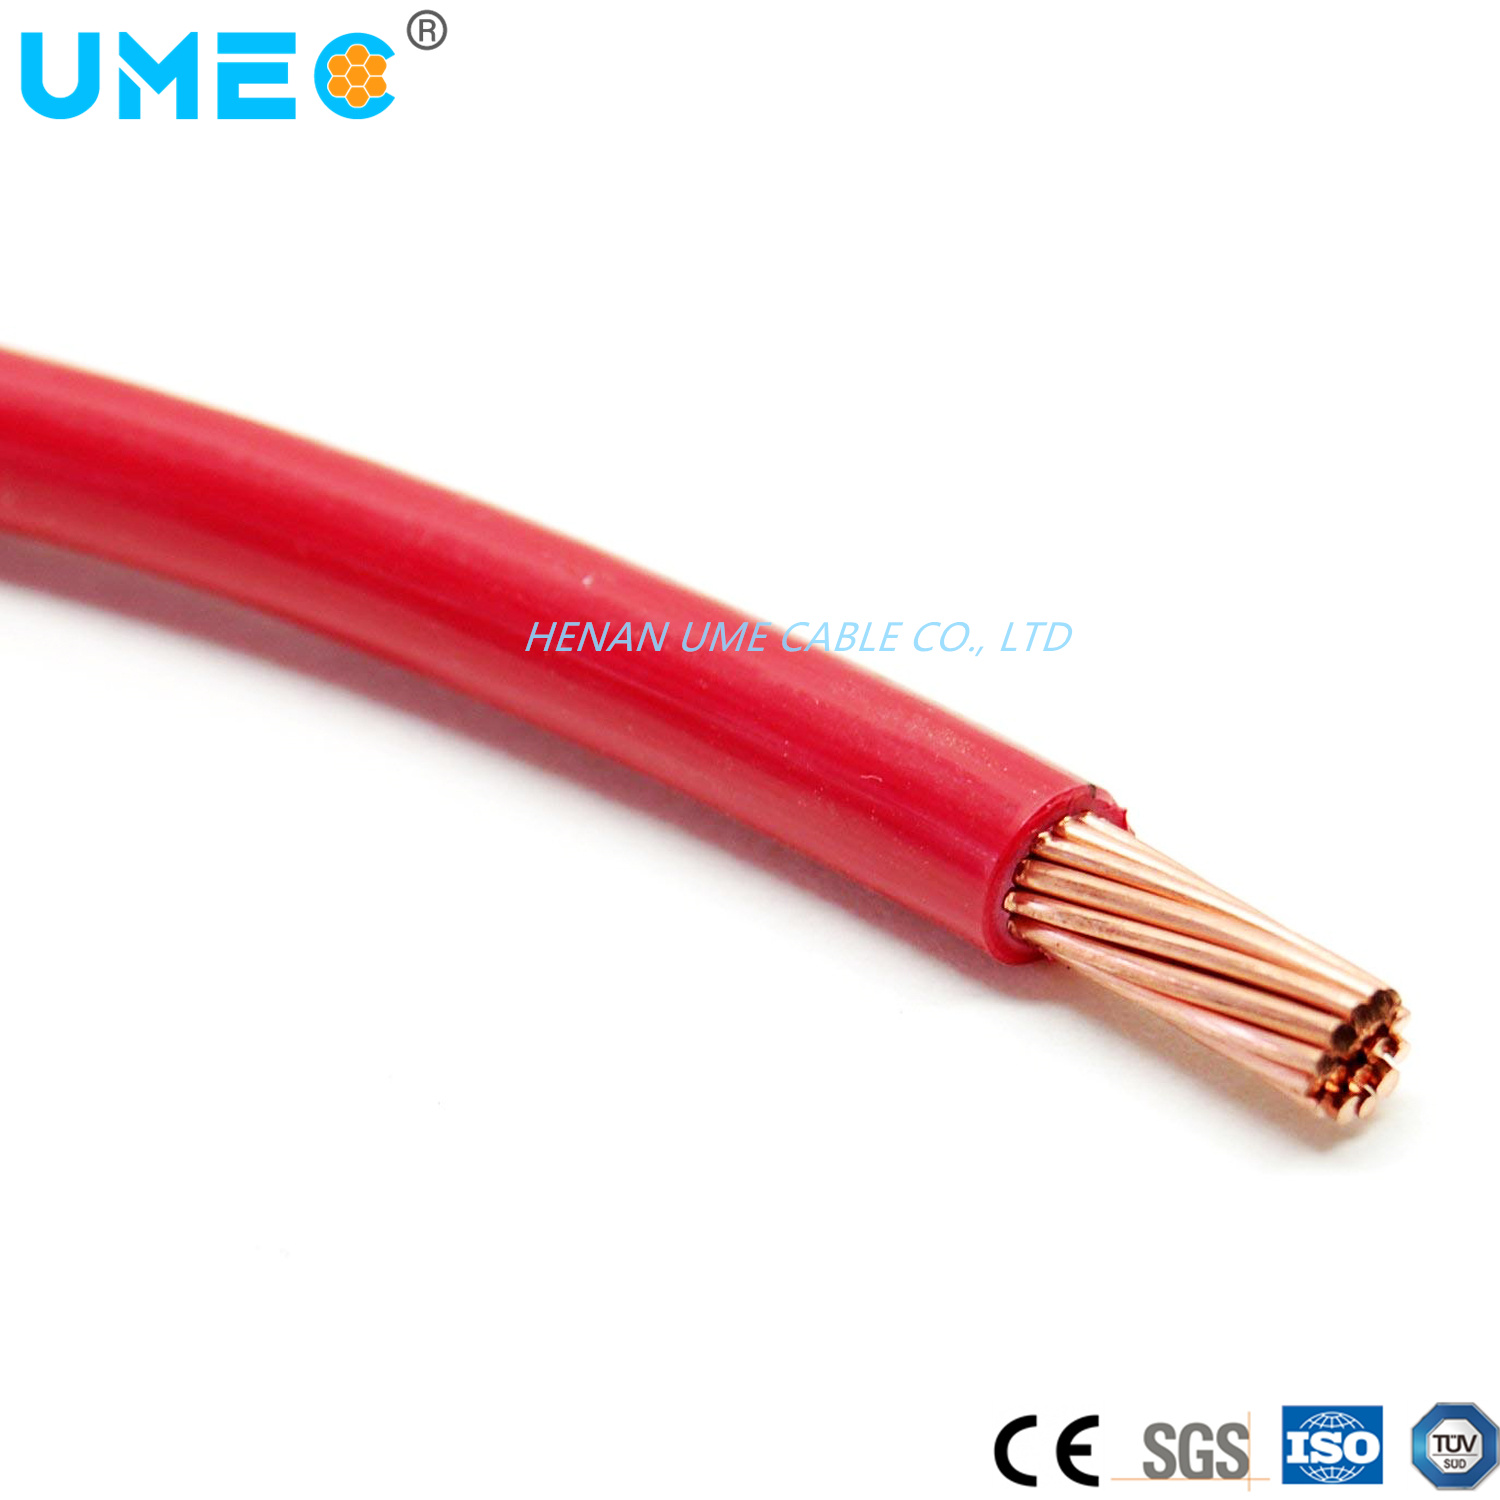 IEC Standard Customized Thhn Thwn Thw Thw-2 Thwn Thwn-2 8AWG 10AWG 12AWG Stranded Copper Electrical Wire 22 AWG Solid